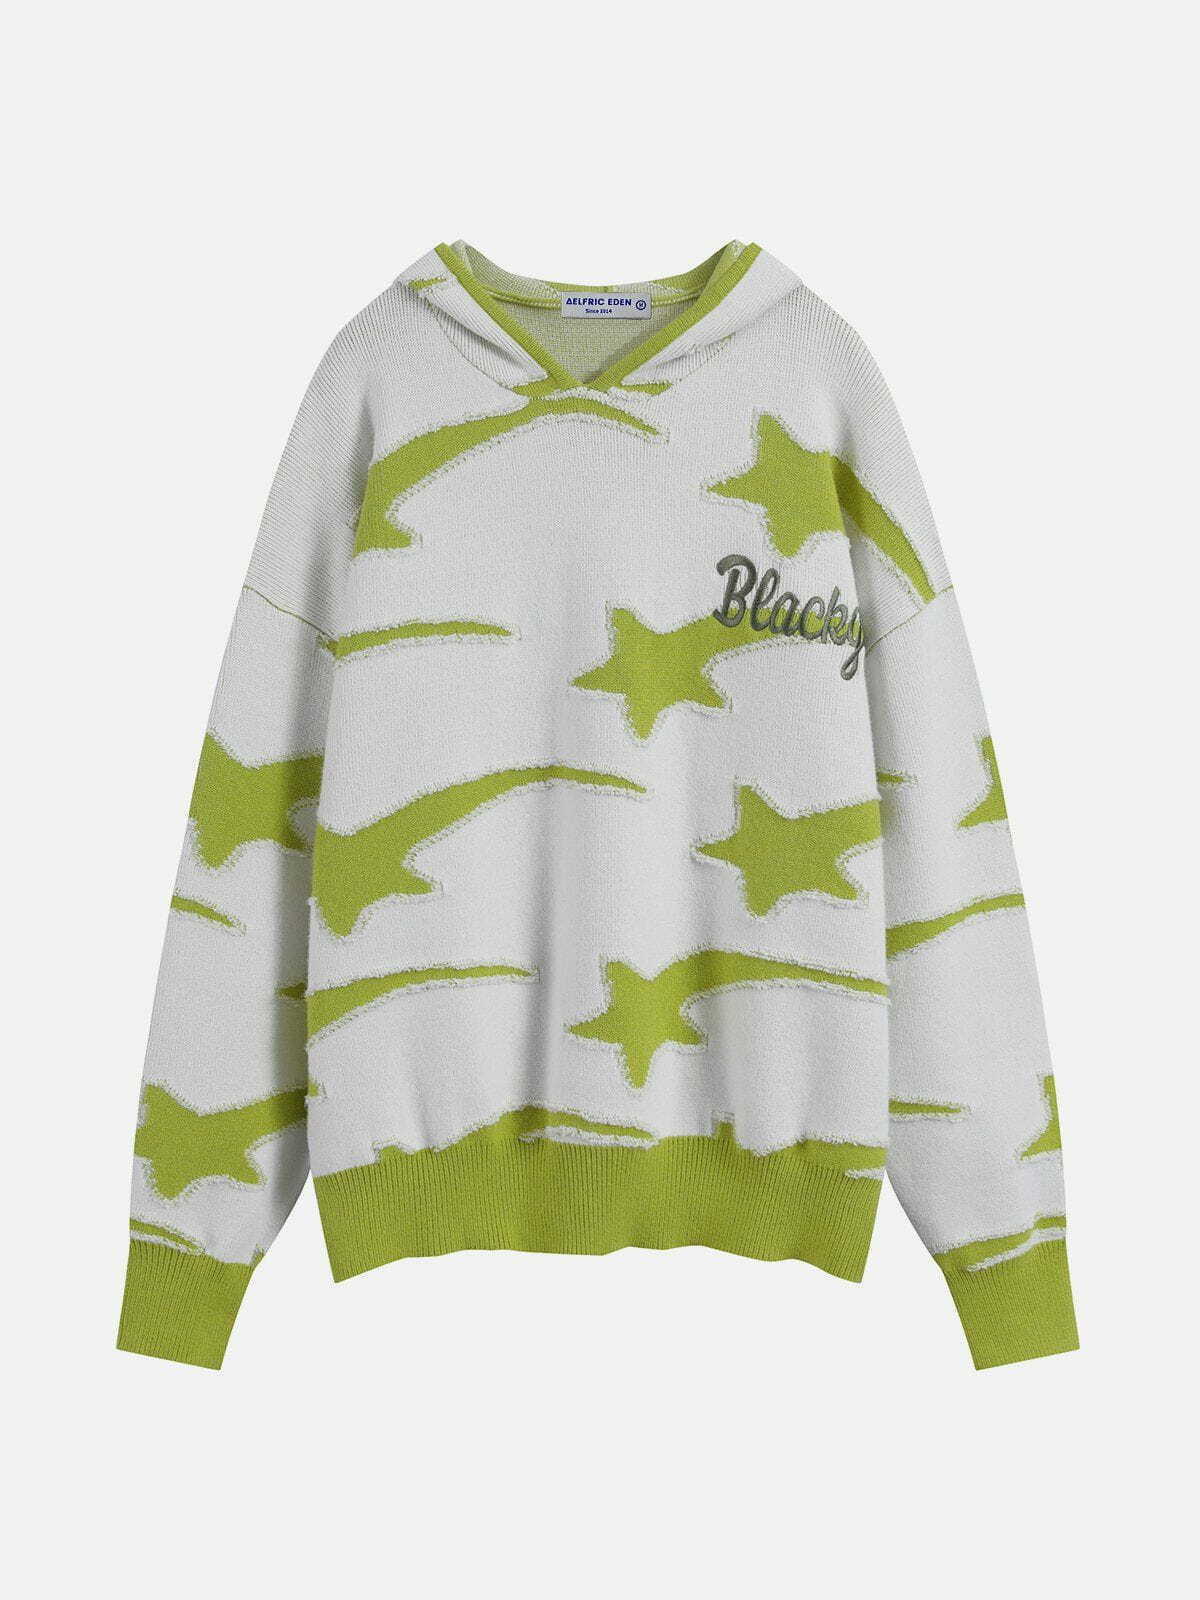 youthful shooting star hoodie eclectic streetwear charm 6444